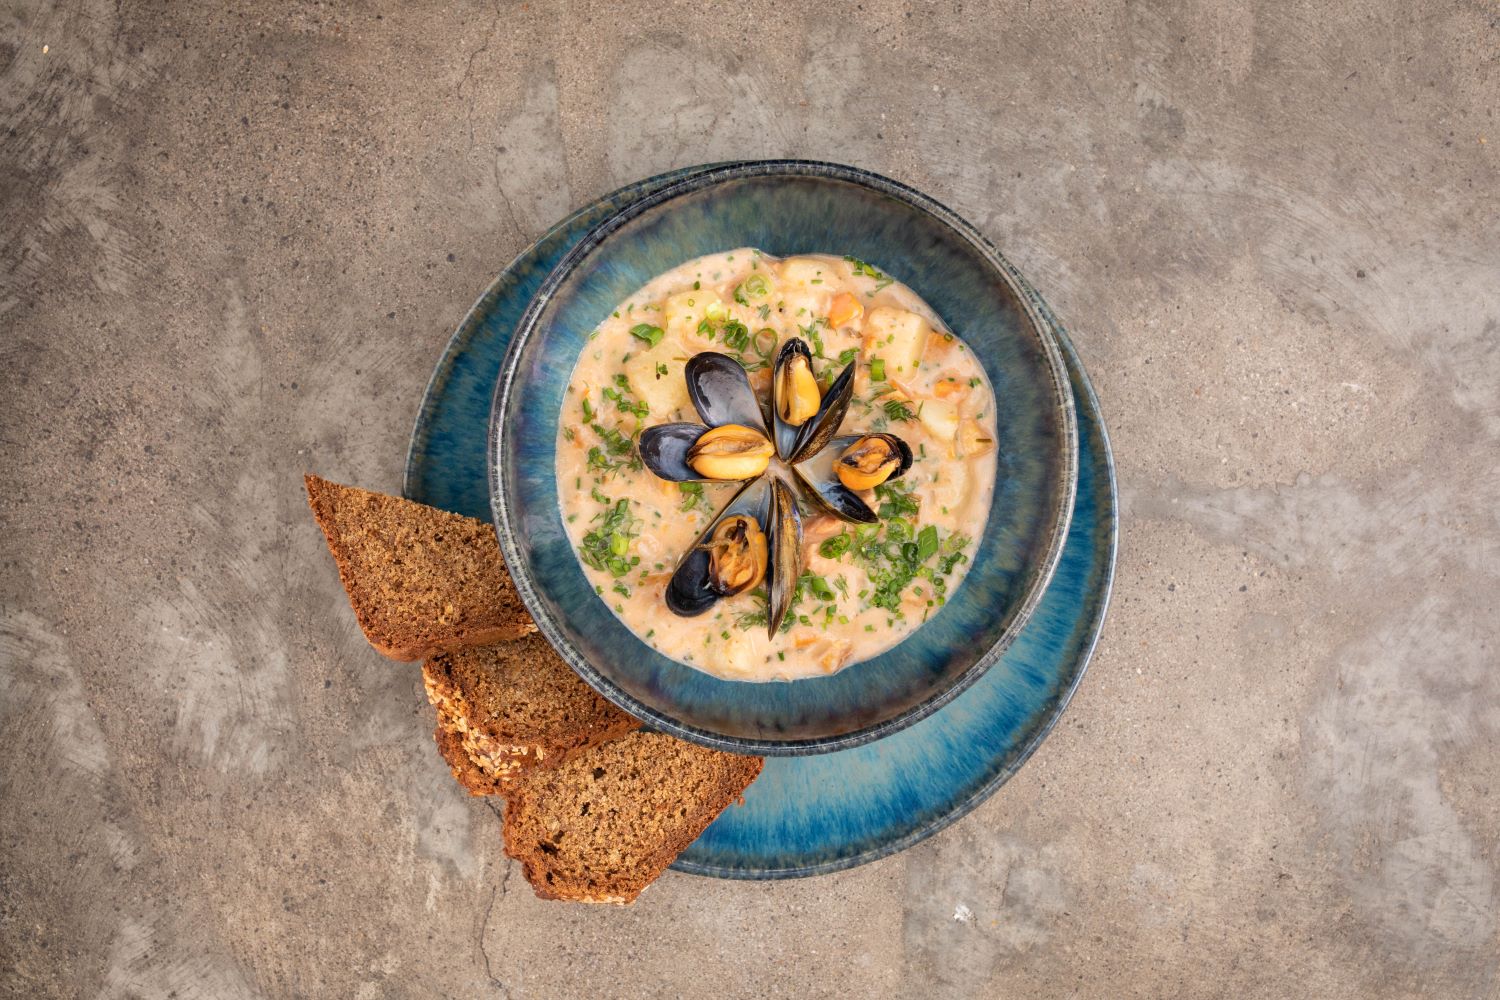 Delicious seafood chowder served on a beautiful blue bowl with a side of brown bread